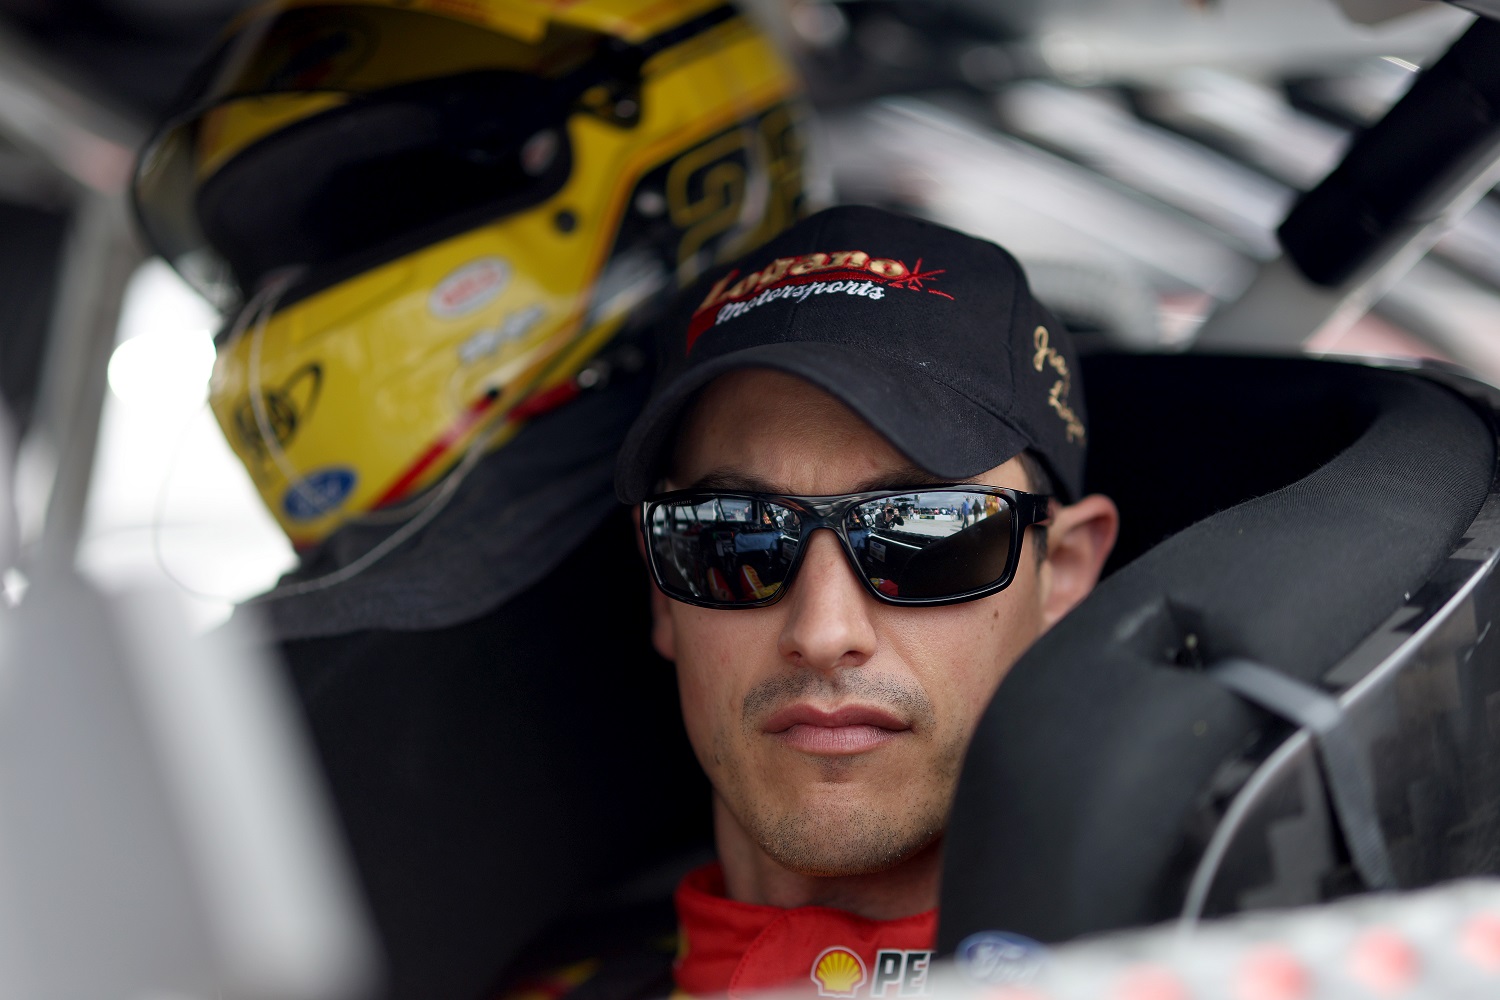 Joey Logano sits in his car prior to the NASCAR Cup Series Goodyear 400 at Darlington Raceway on May 8, 2022. | James Gilbert/Getty Images